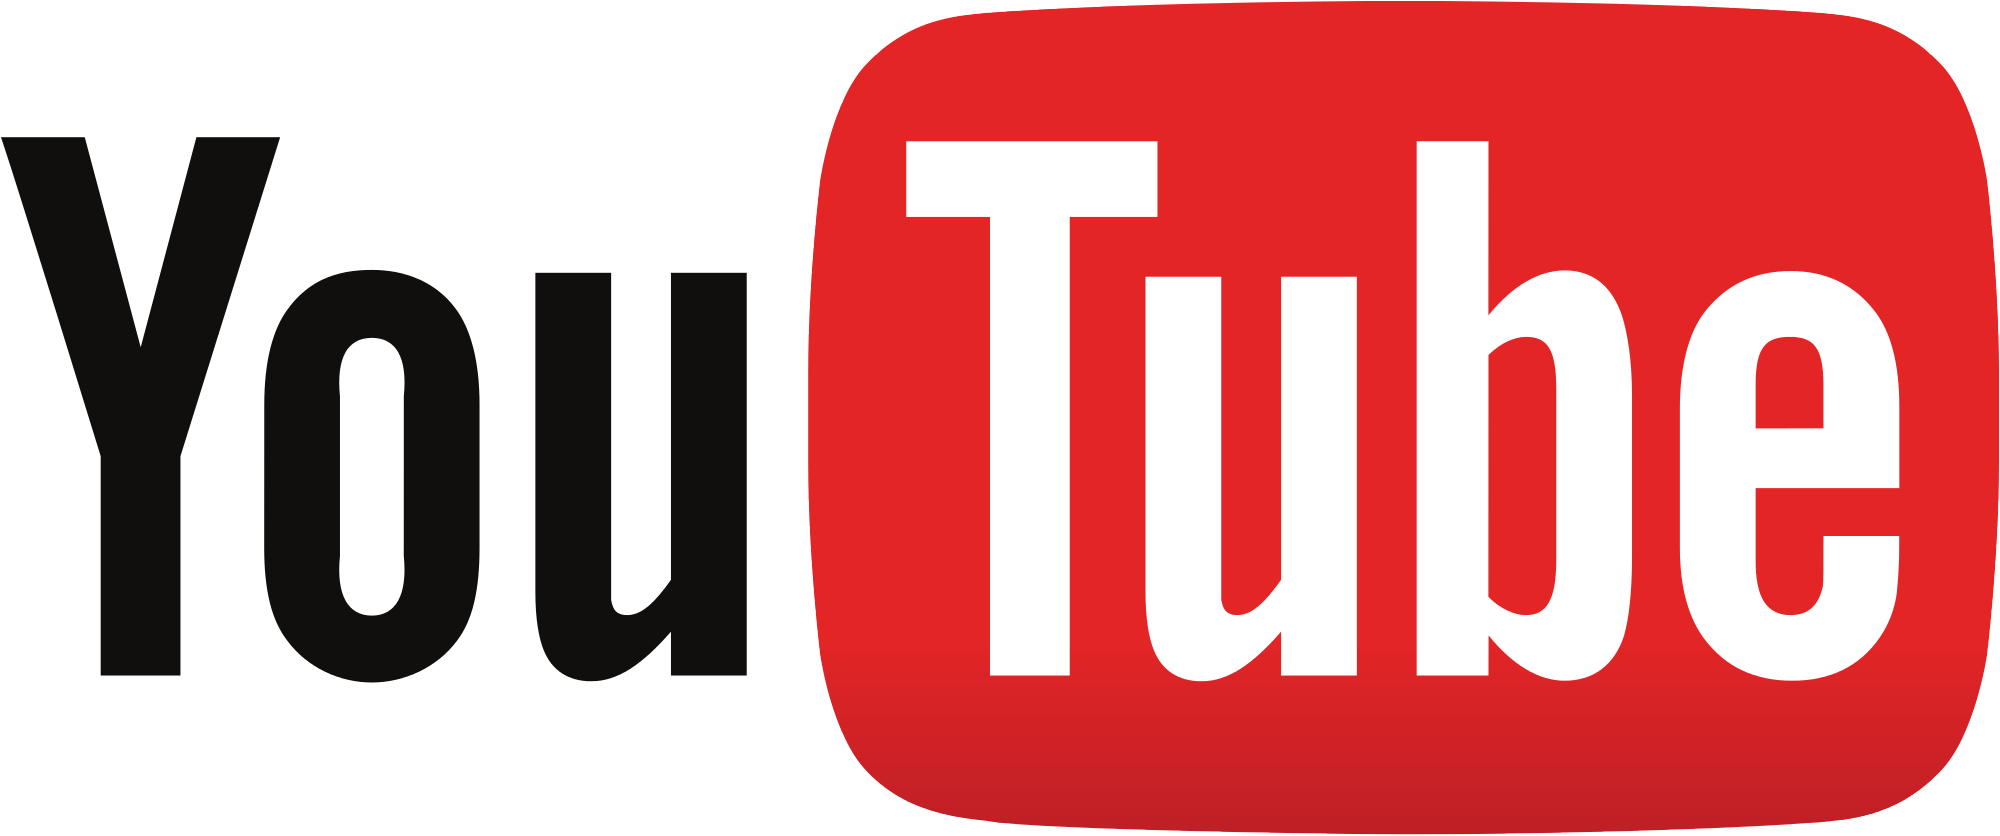 YouTube Expands To 7 More Countries